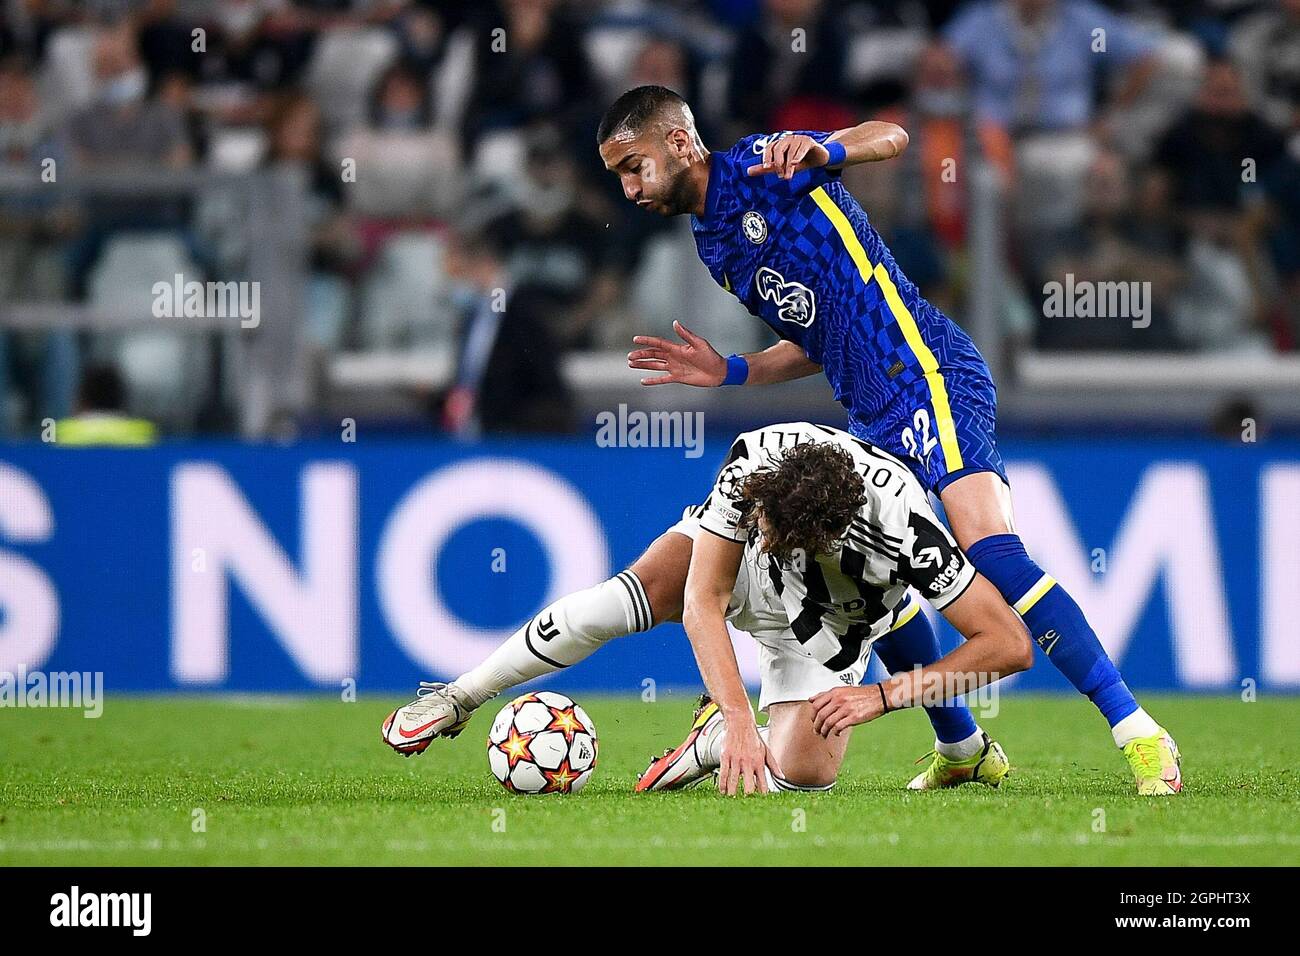 Turin, Italy. 29 September 2021. Manuel Locatelli (L) of Juventus FC competes for the ball with Hakim Ziyech of Chelsea FC  during the UEFA Champions League football match between Juventus FC and Chelsea FC. Credit: Nicolò Campo/Alamy Live News Stock Photo